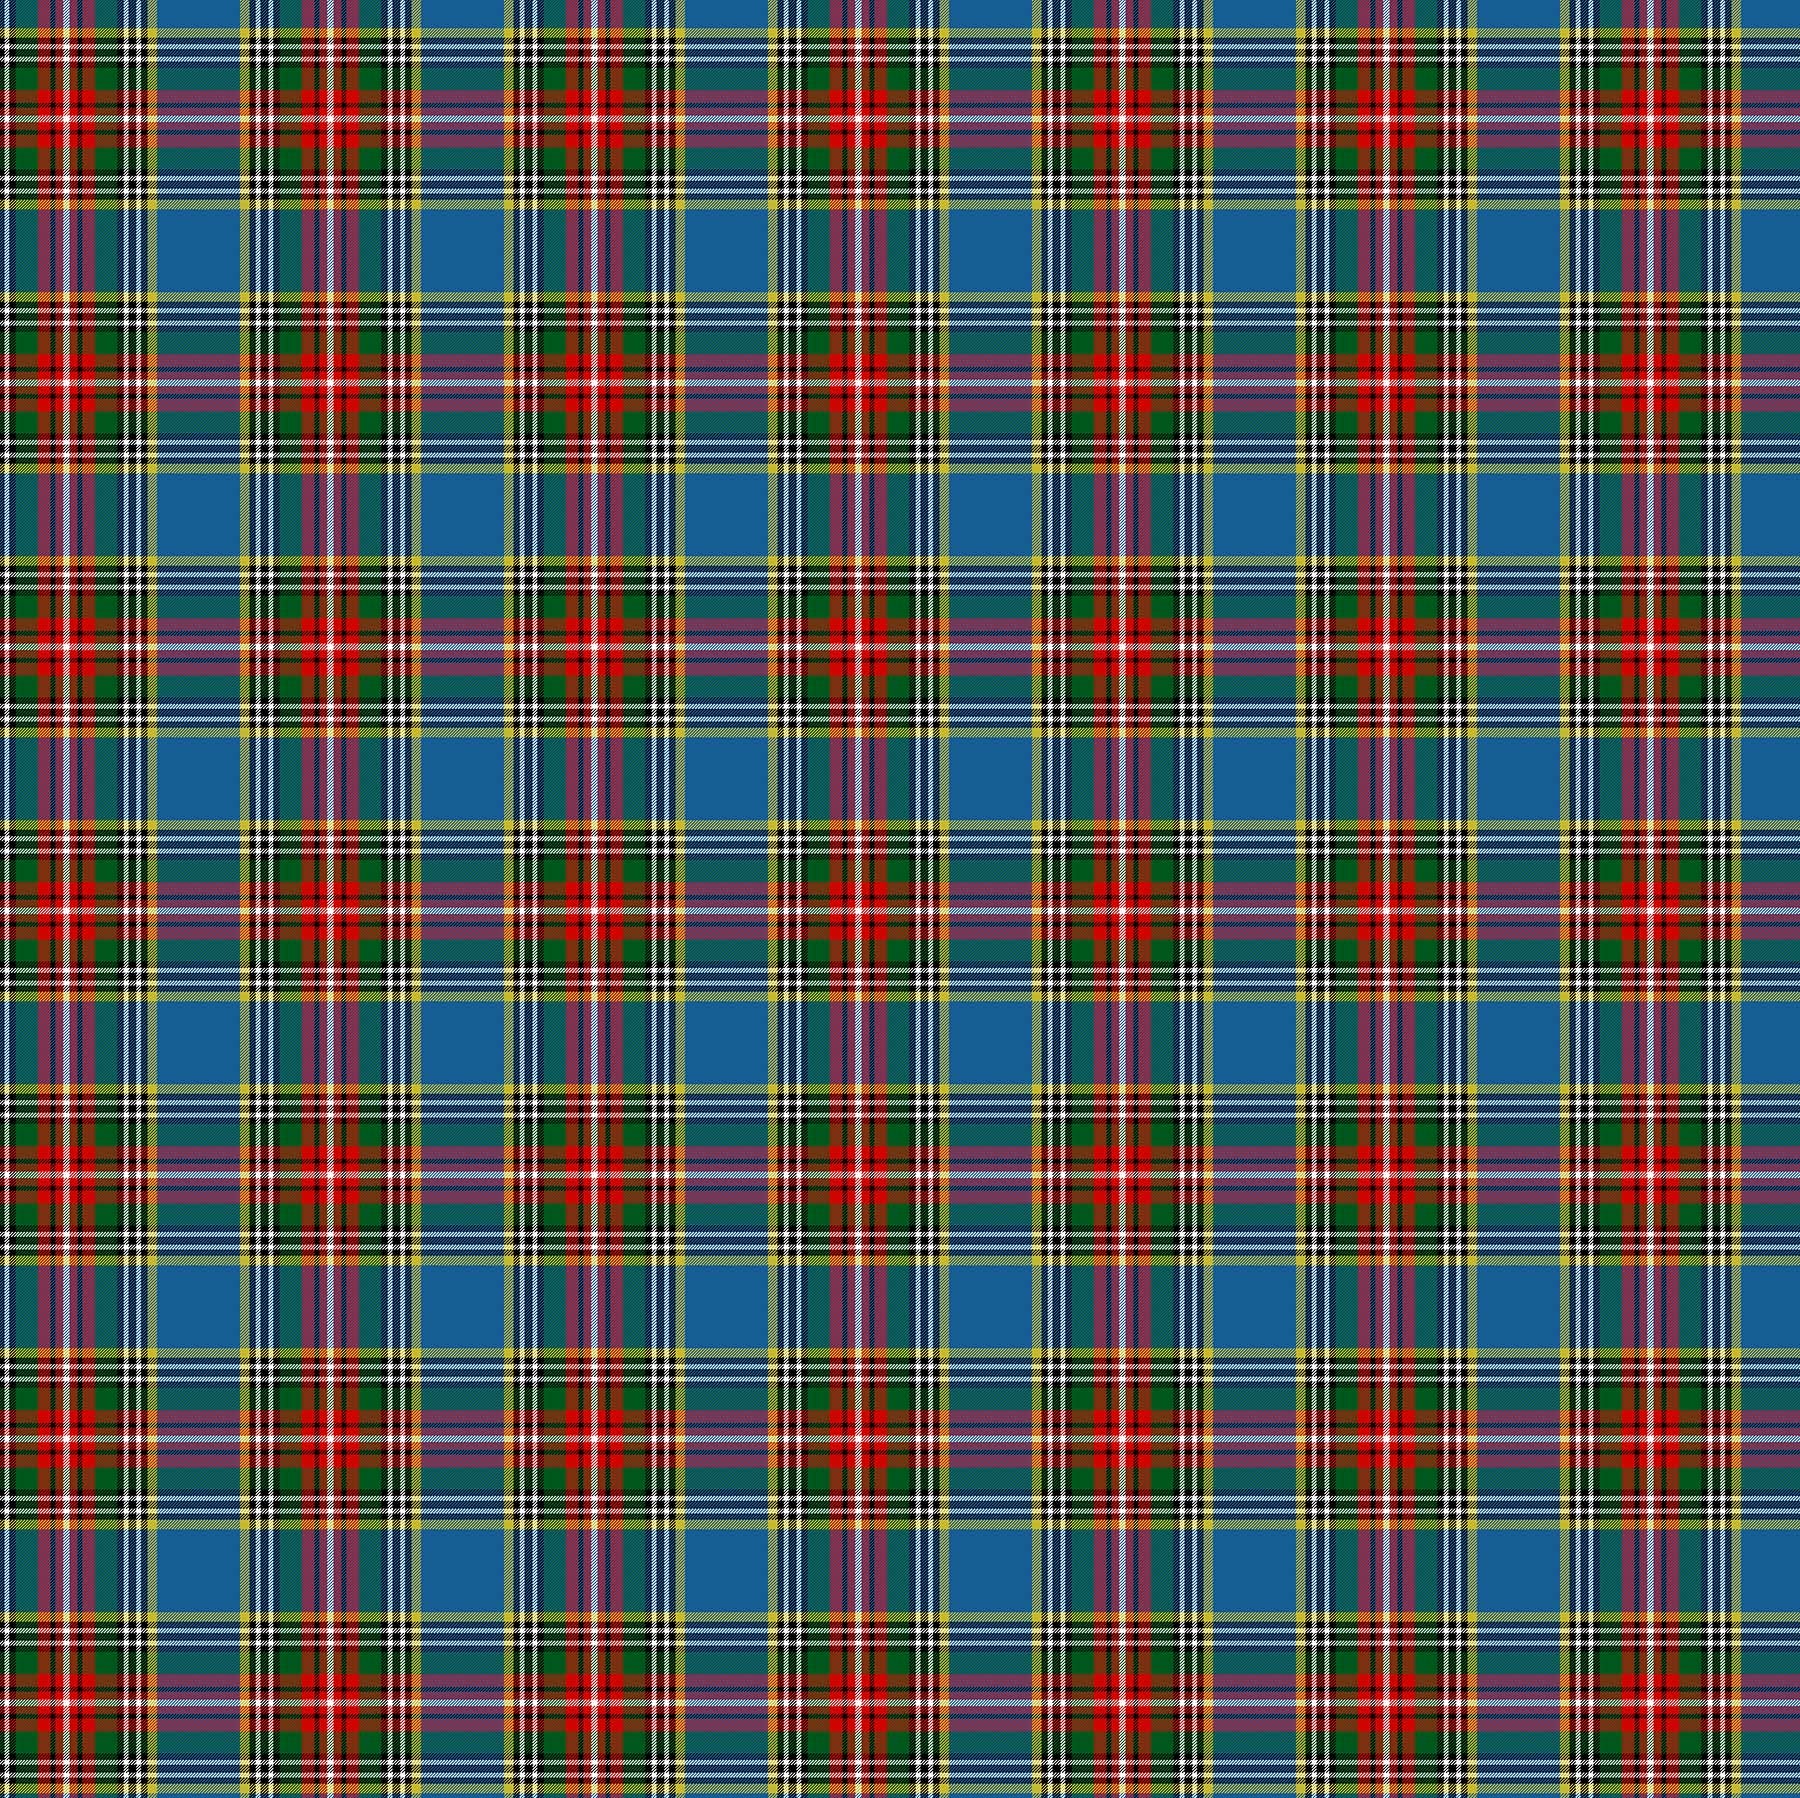 Totally Tartans Brushed Cotton Quilt Fabric - Macbeth in Blue/Multi - W24505-44